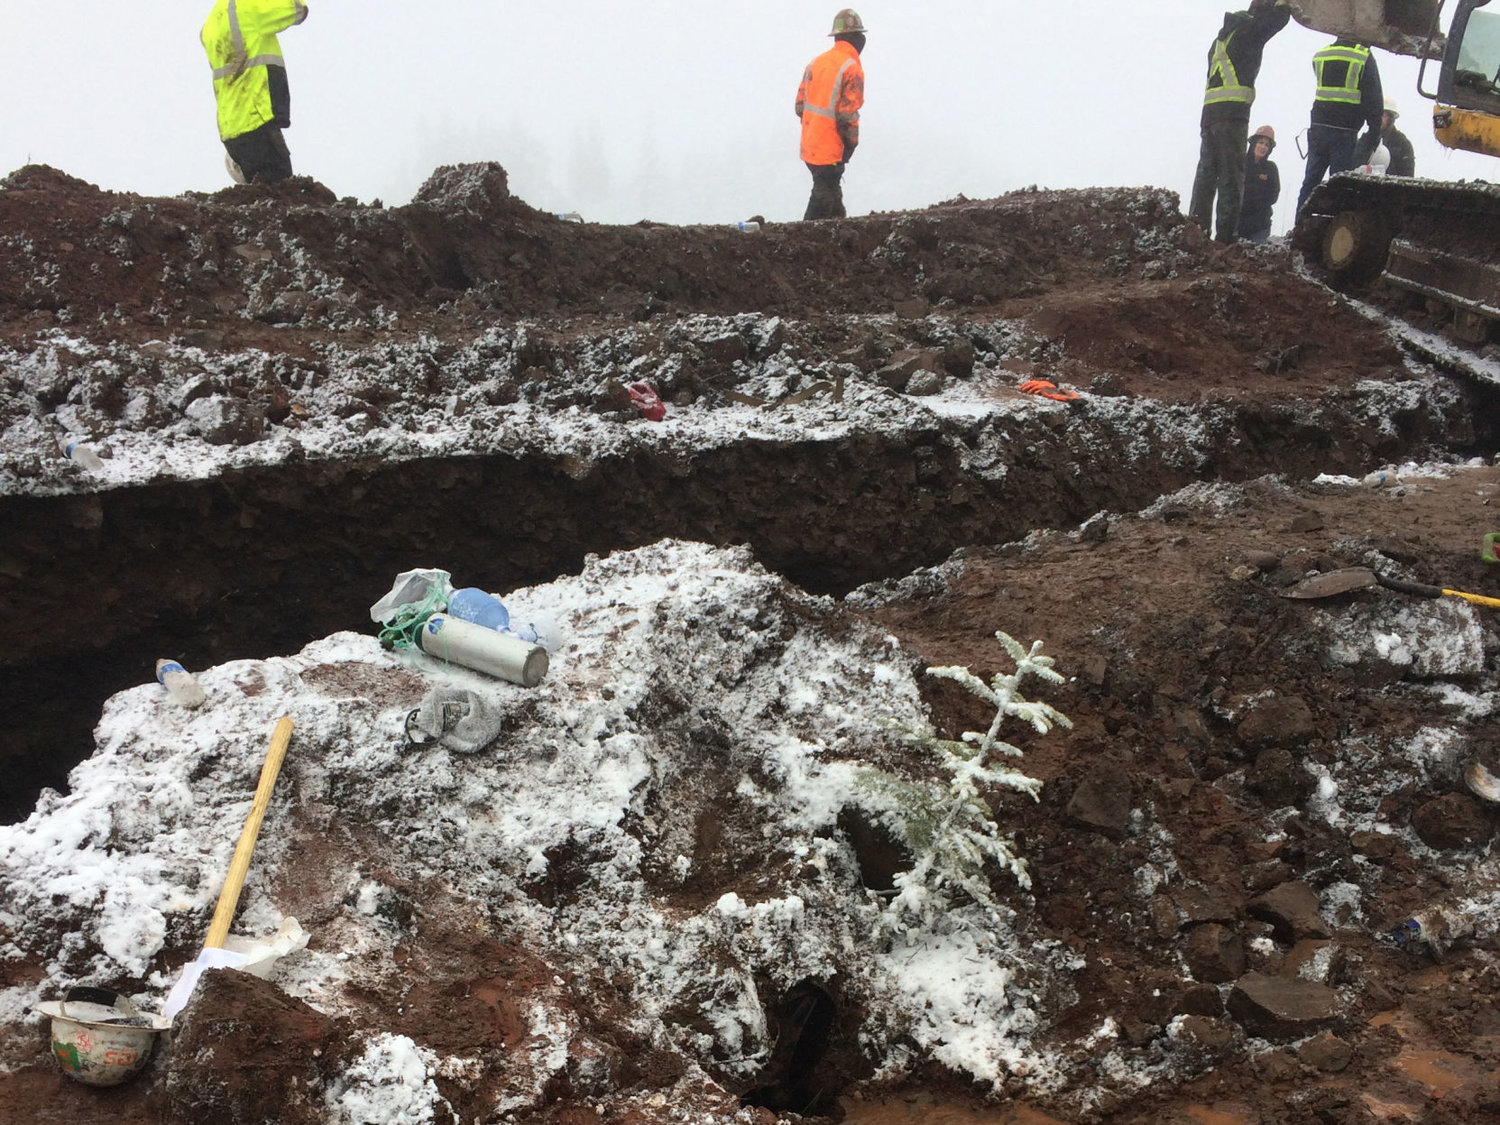 According to interviews with the Thurston County Sheriff’s Office, around 25 employees took turns trying to dig out Jonathan Stringer, who was buried during a pair of trench collapses at the Skookumchuck Wind Farm on Jan. 9, 2020.